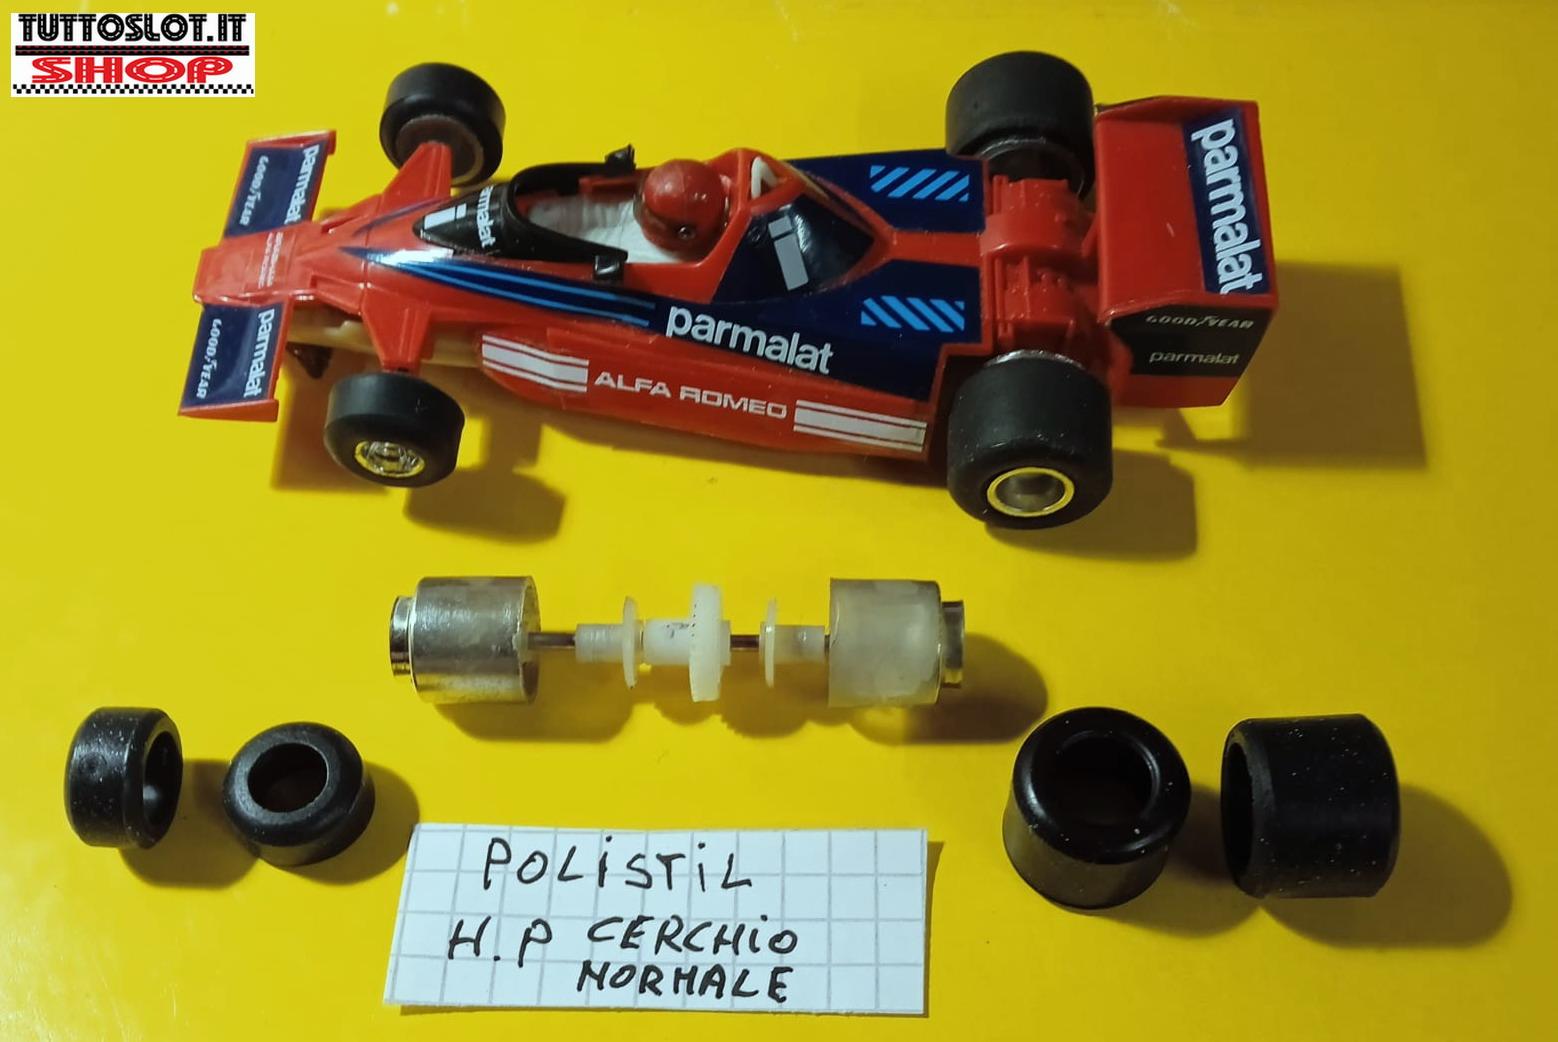 Gomme POSTERIORI per telaio HP - Polistil rear tyres for HP chassis